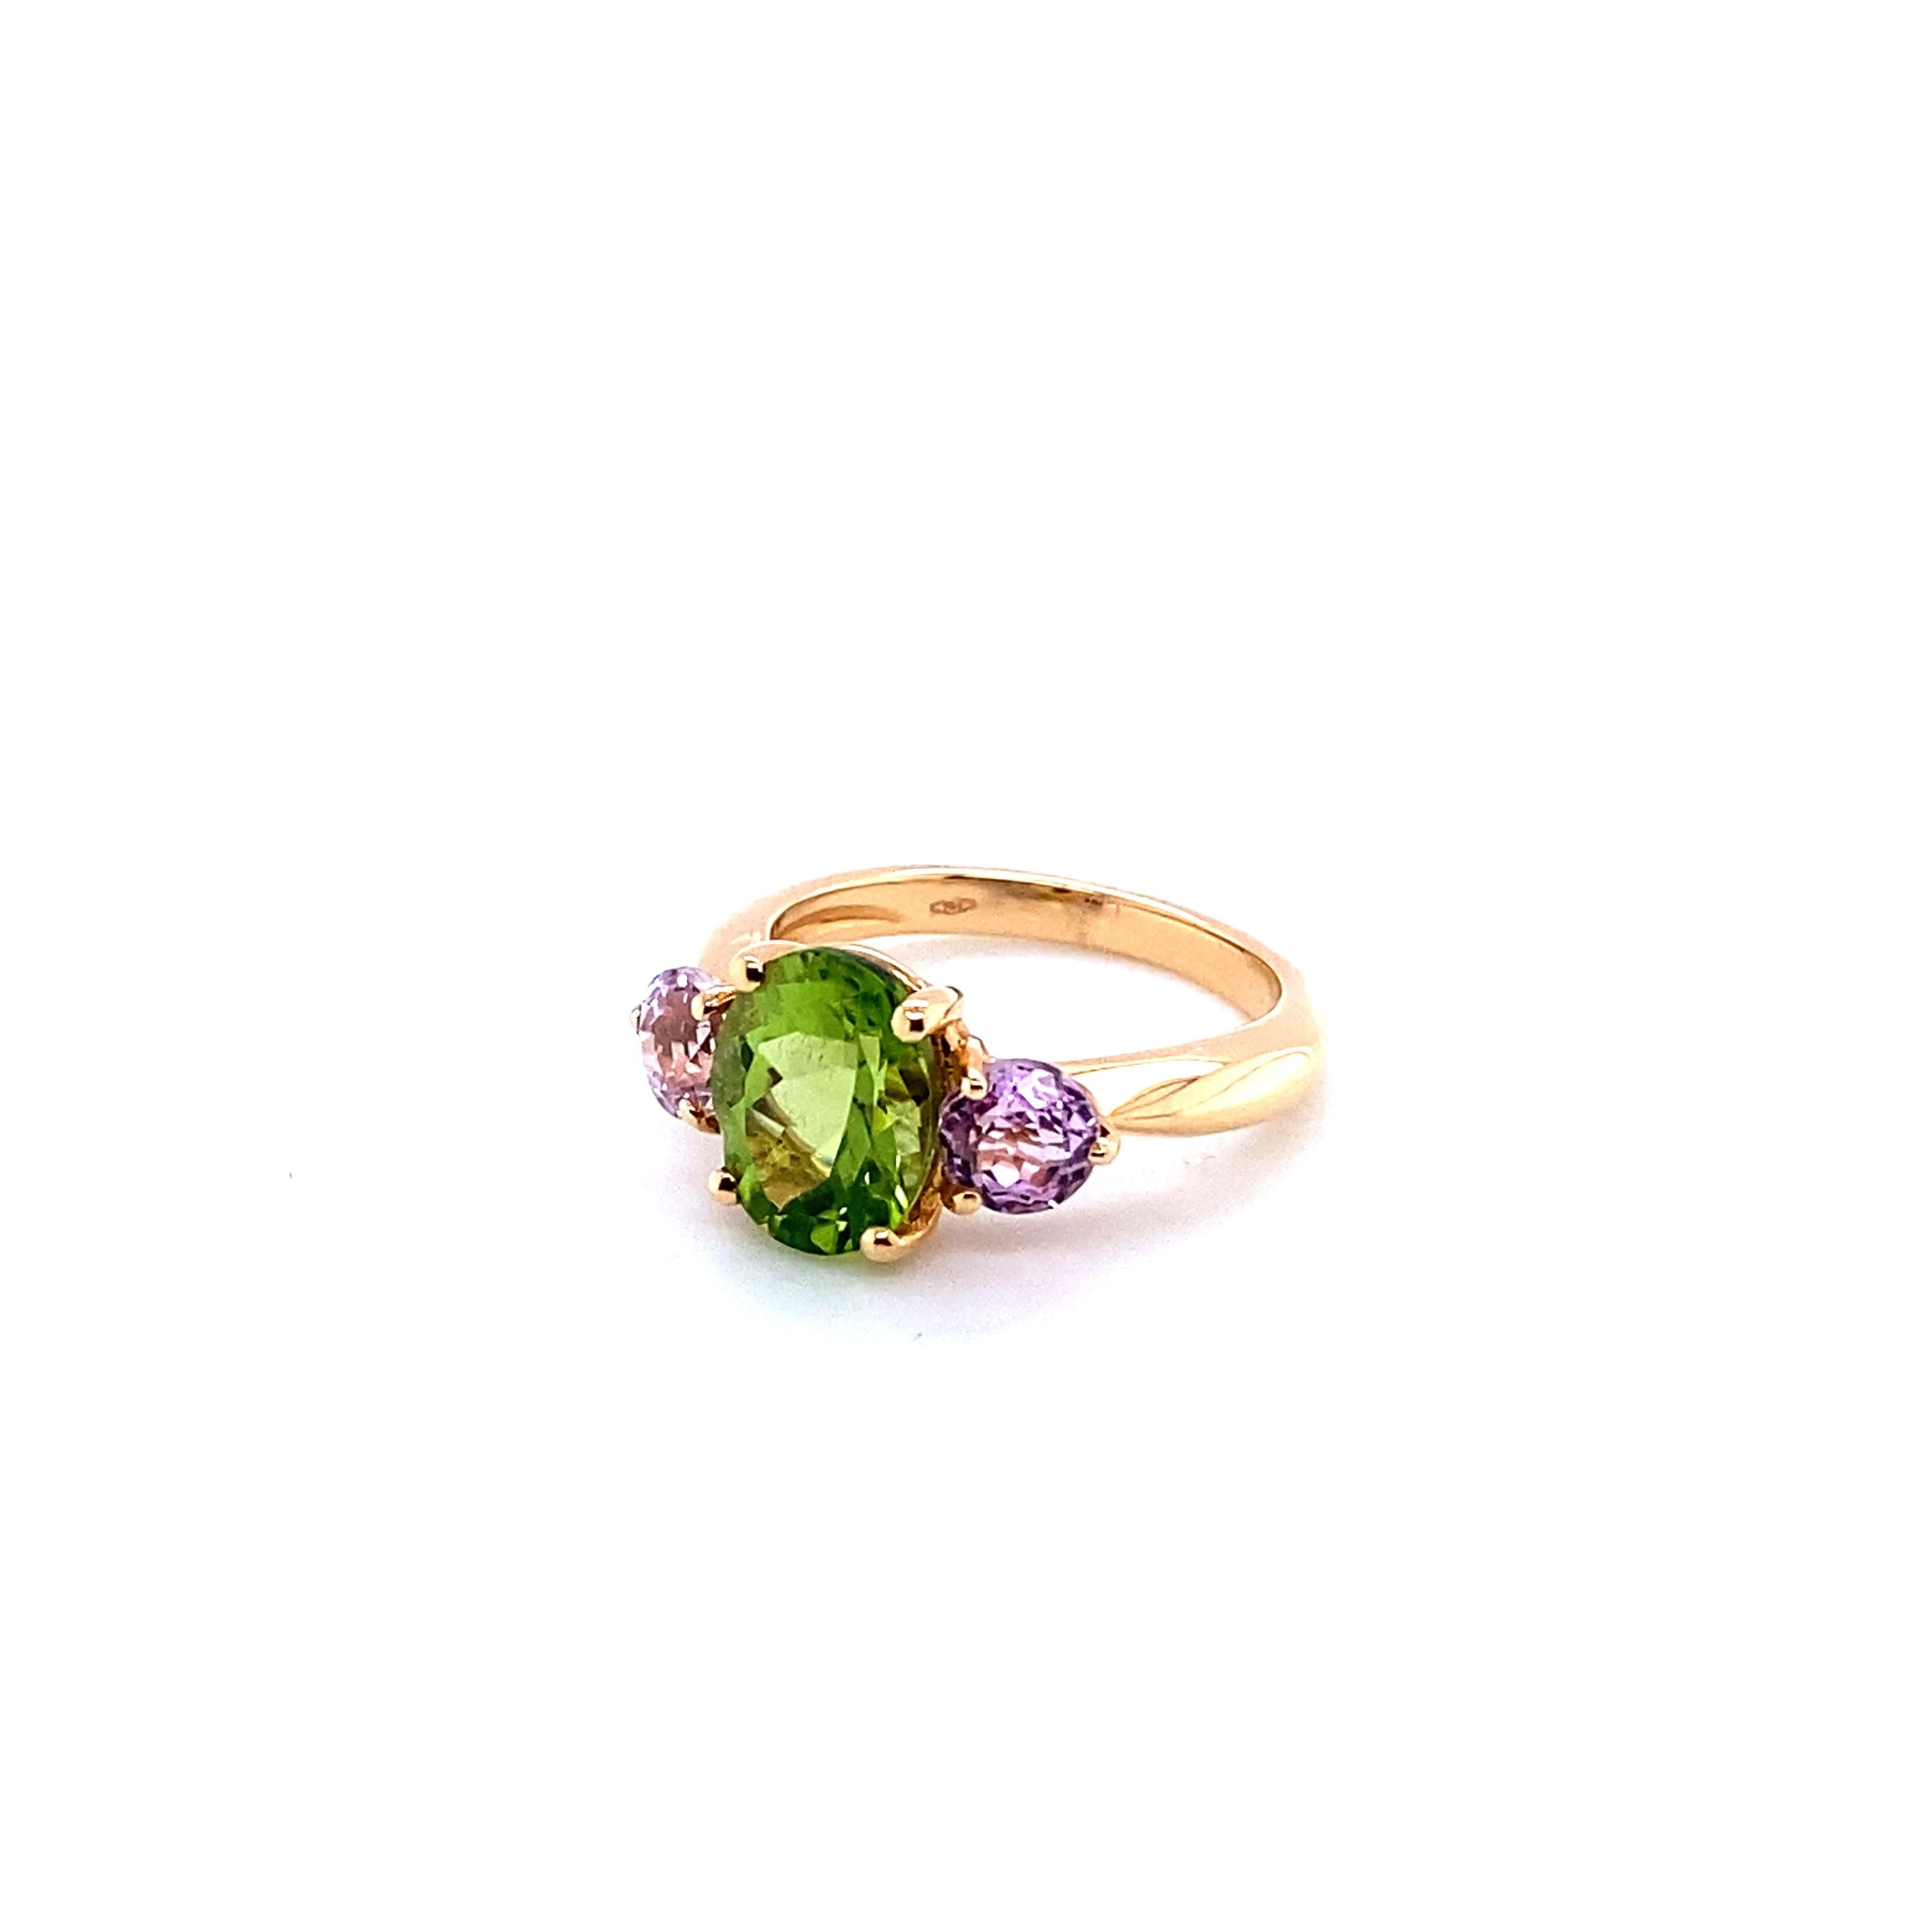 Pink Gold Ring Surmounted by a Peridot Accompanied by Two Kunzites
French Collection by Mesure et Art du Temps.

The Oval Peridot is 1cm in length and 0.8 cm in width.
The Kunzite is 0.5cm in length and 0.5cm in width.
The weight of the gold is 5.15